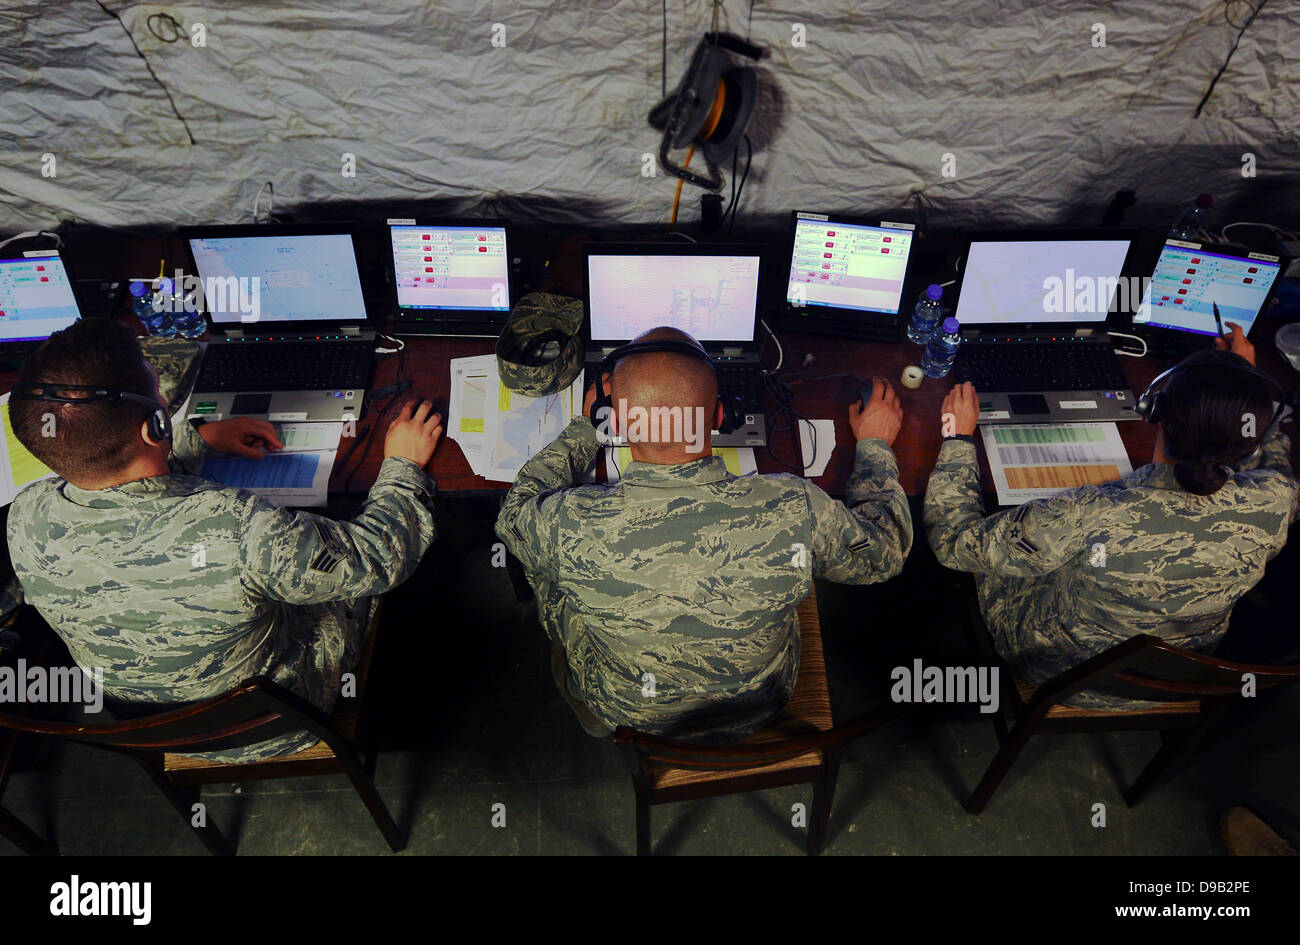 US Air Force airmen react to simulated threats from their regional Air Command Center during exercise Eagle Resolve April 24, 2013 in Doha, Qatar. Stock Photo